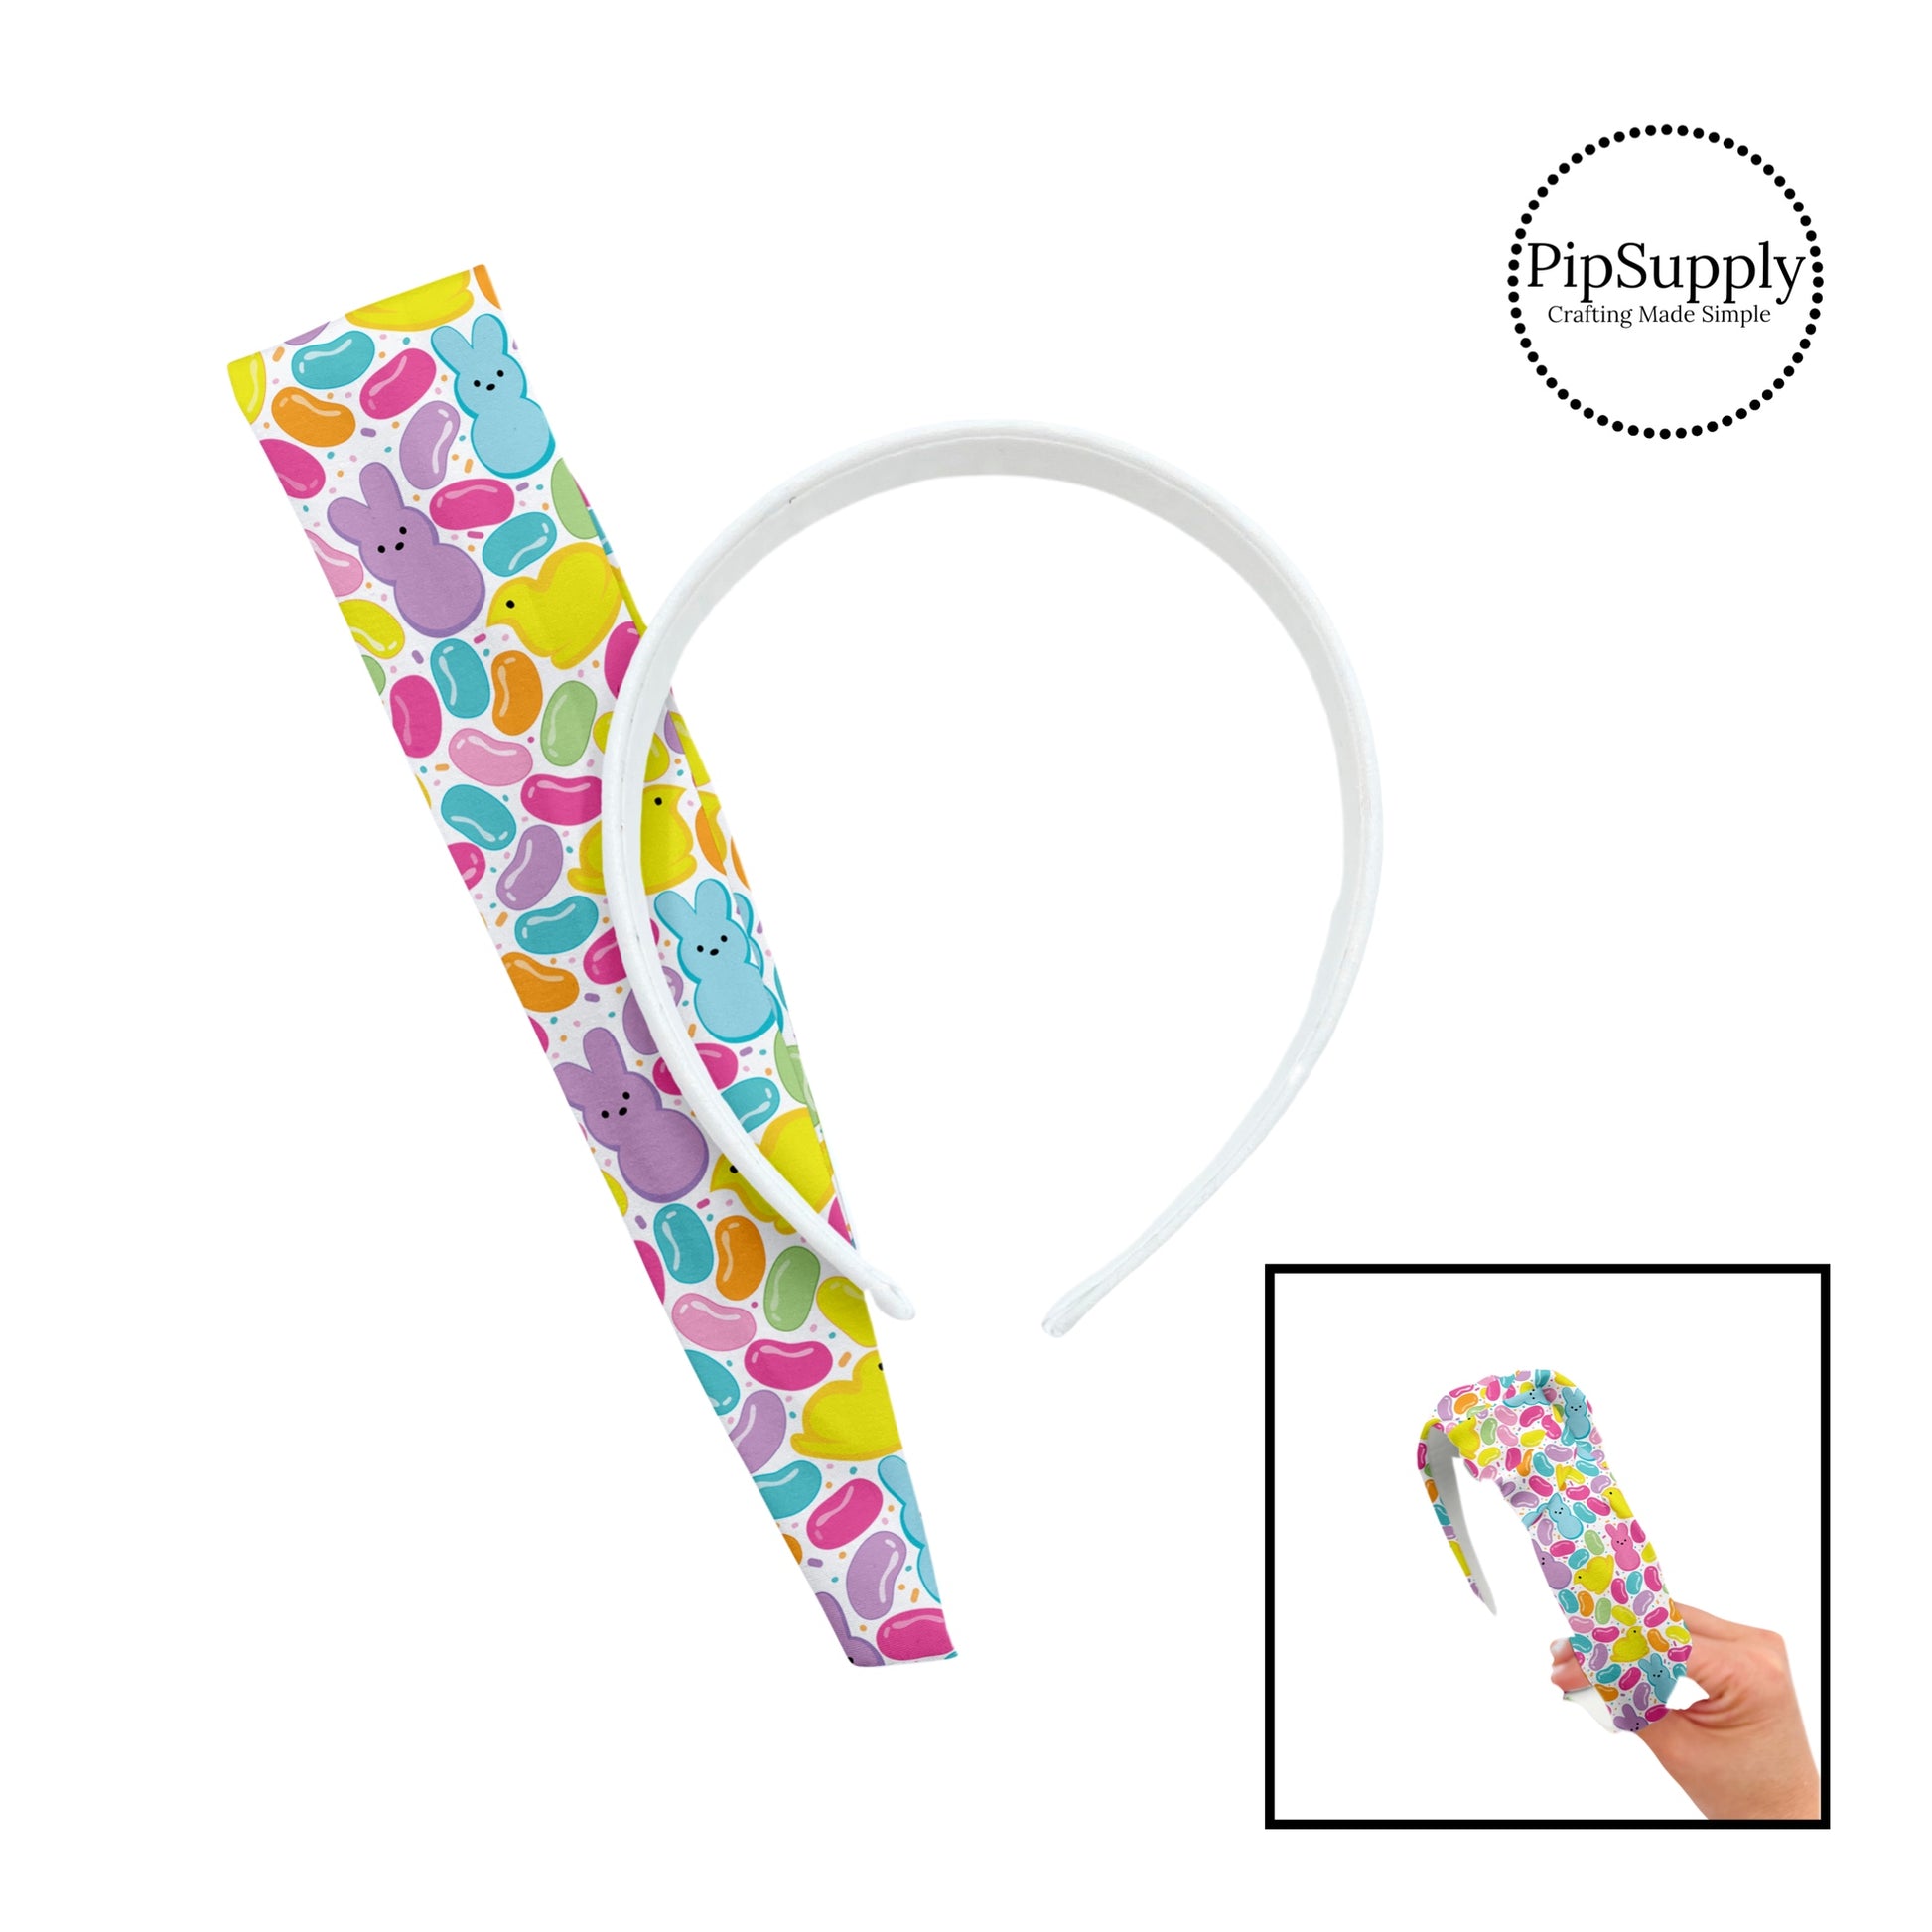 These spring patterned headband kits are easy to assemble and come with everything you need to make your own knotted headband. These kits include a custom printed and sewn fabric strip and a coordinating velvet headband. This cute pattern features Easter candy and treats.